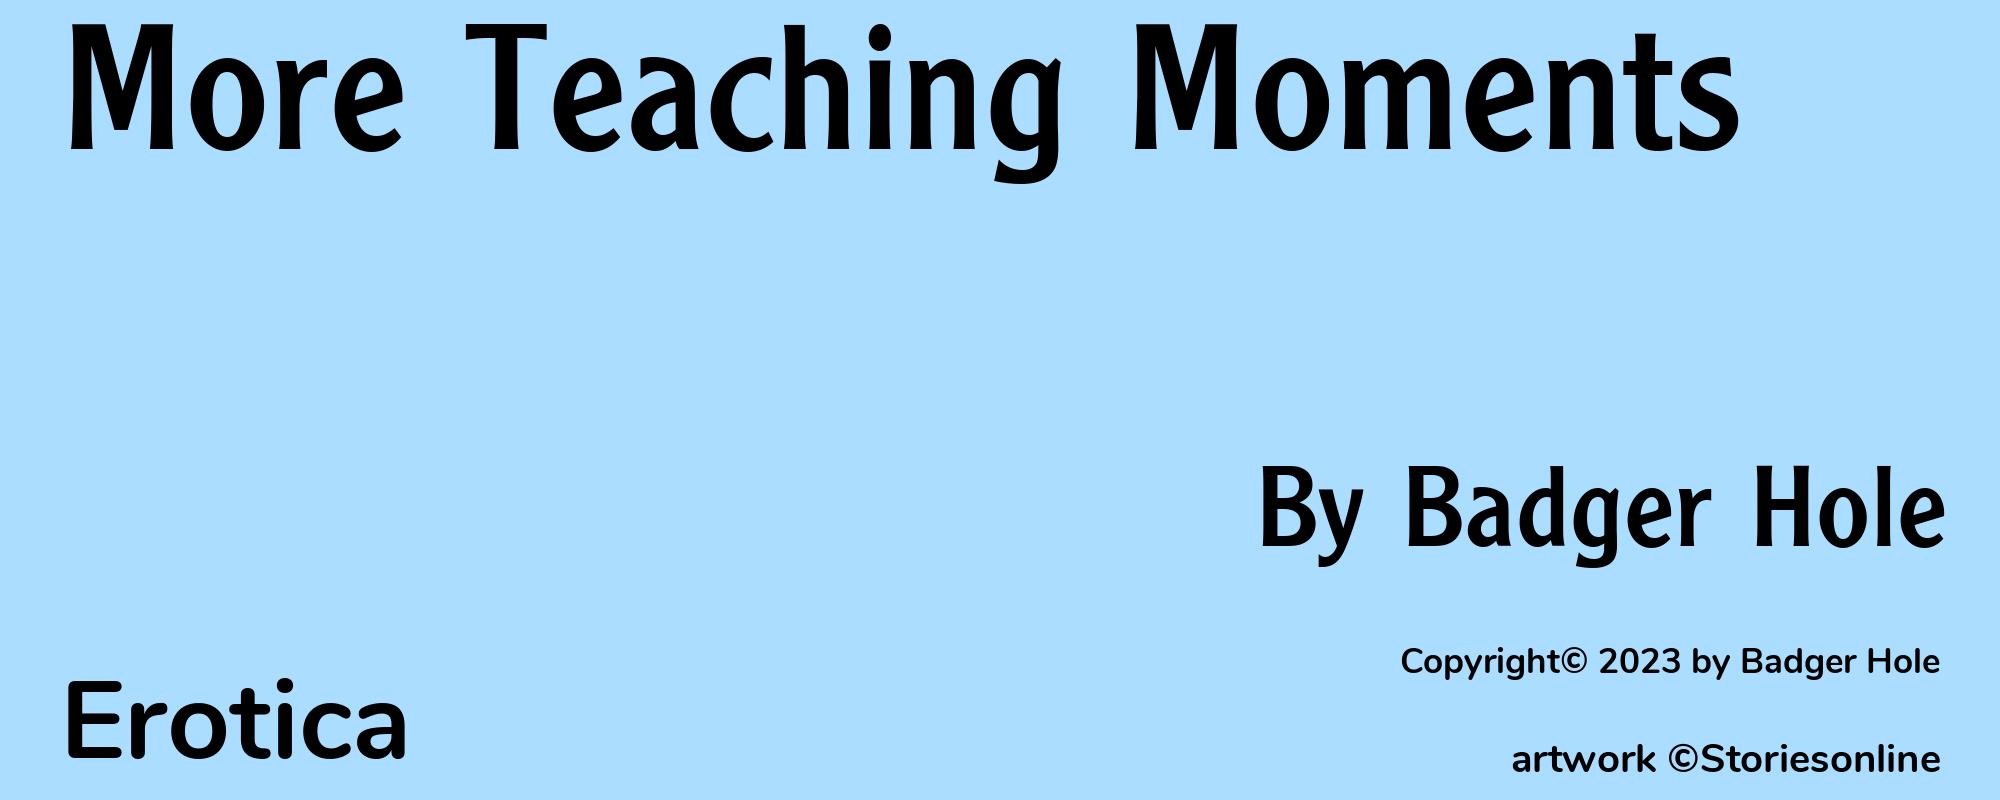 More Teaching Moments - Cover